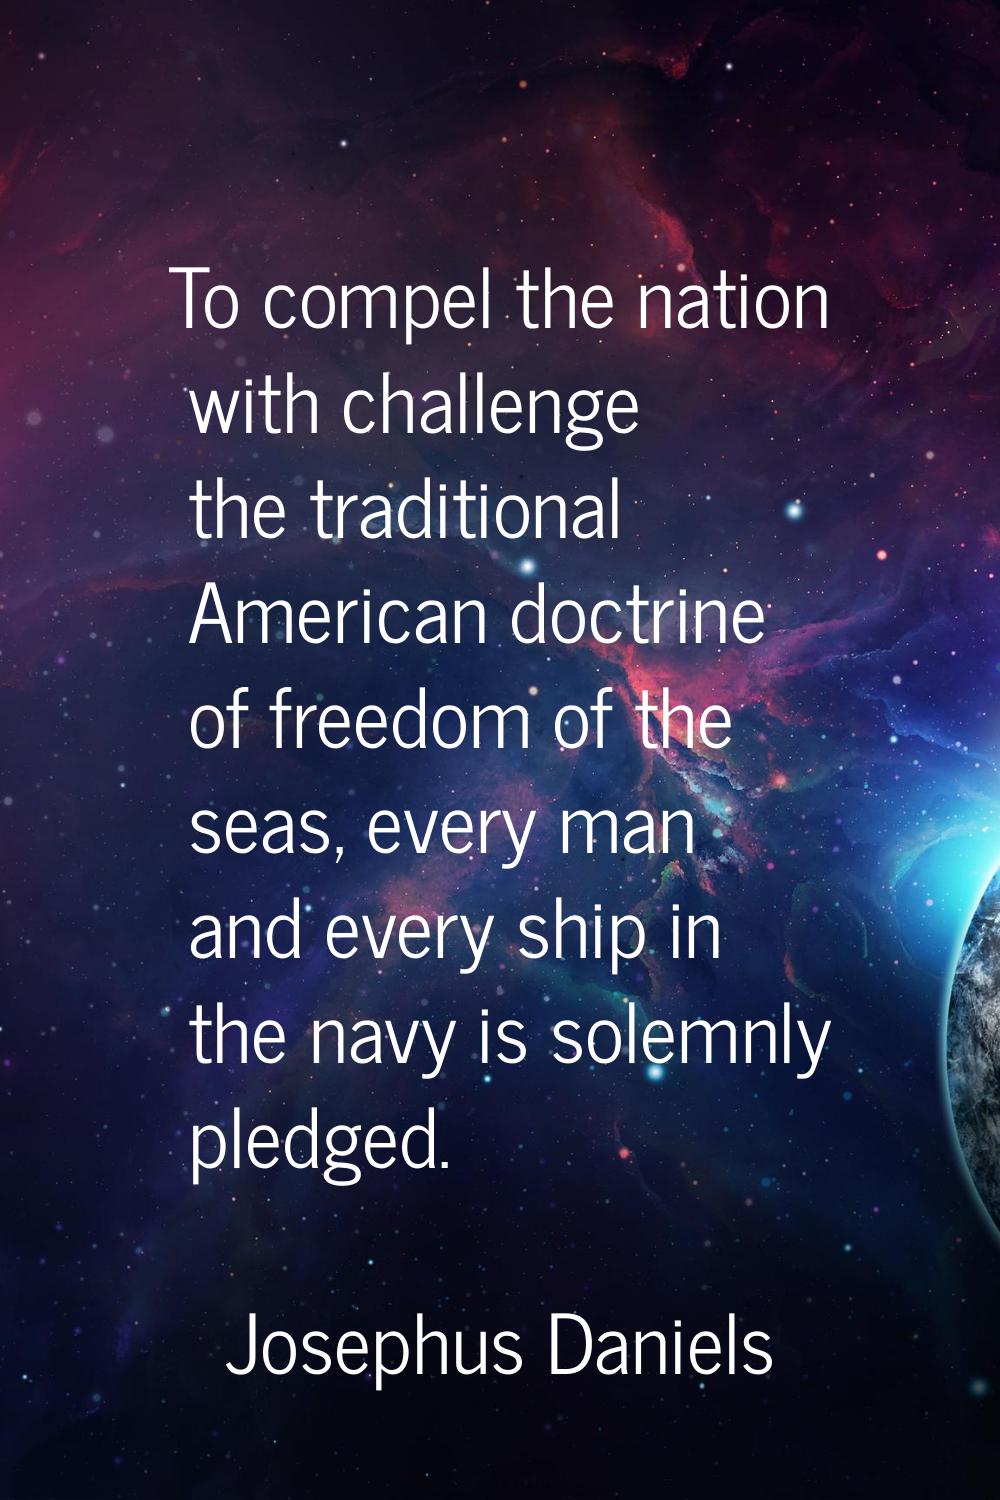 To compel the nation with challenge the traditional American doctrine of freedom of the seas, every